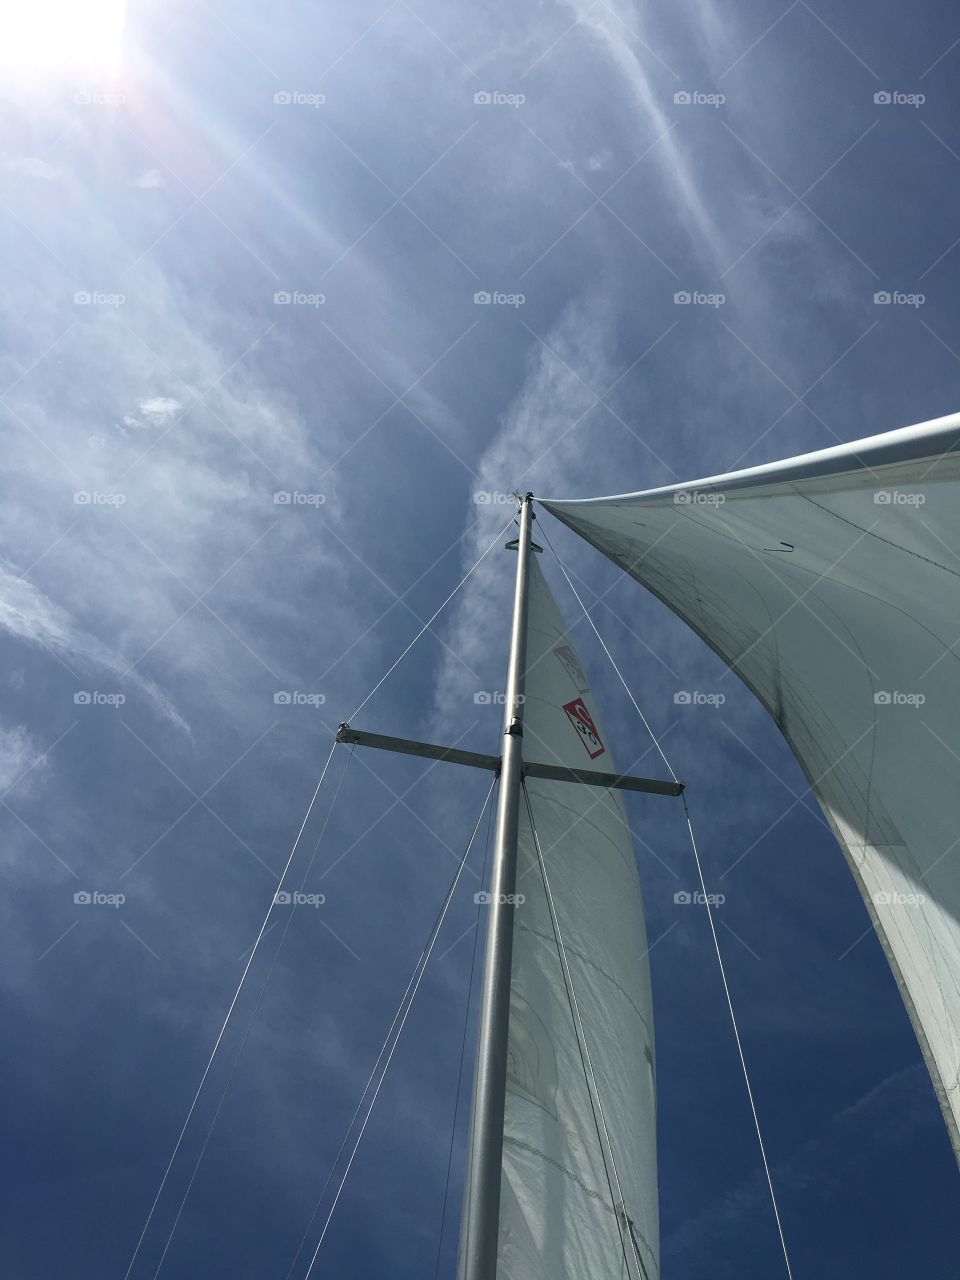 Wind in the sail. 